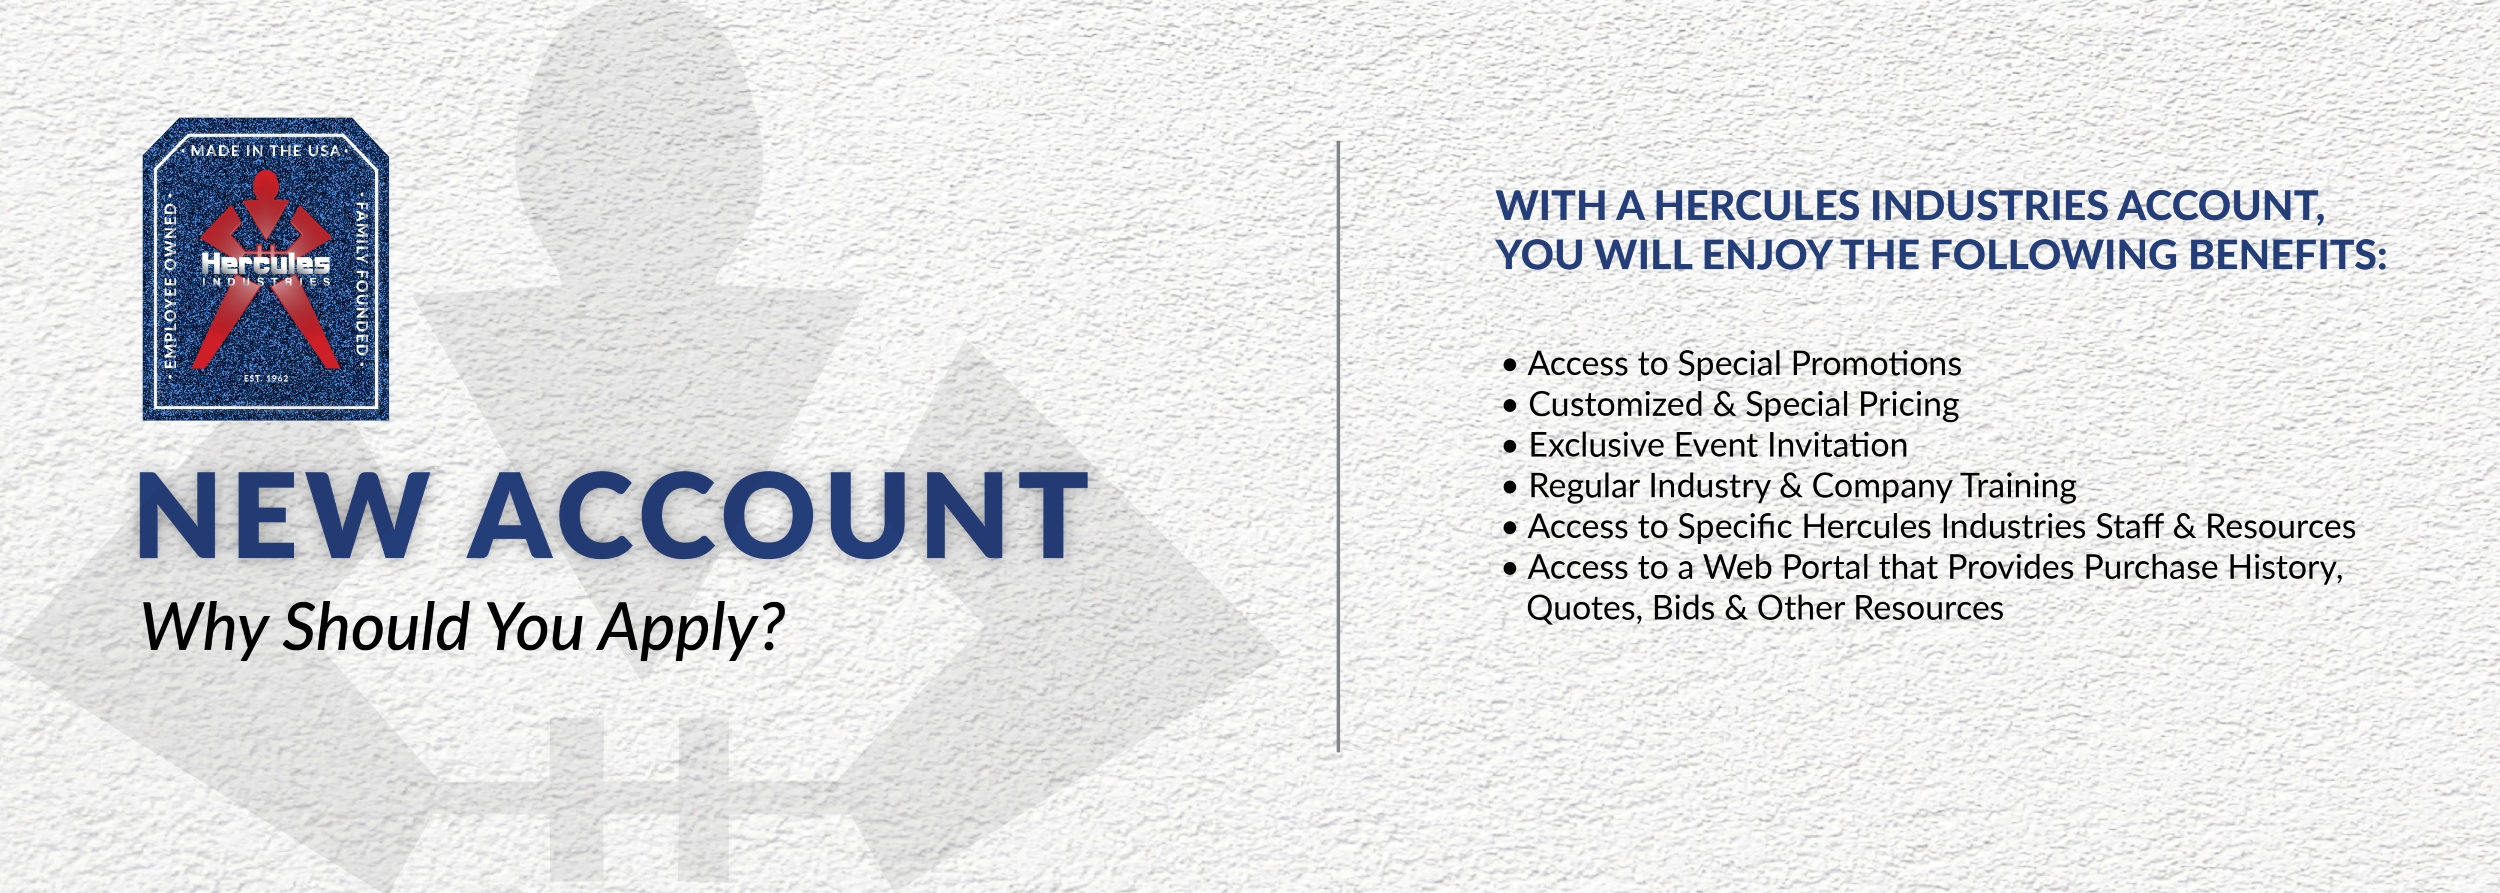 Benefits of Having an Account!LEARN MORE